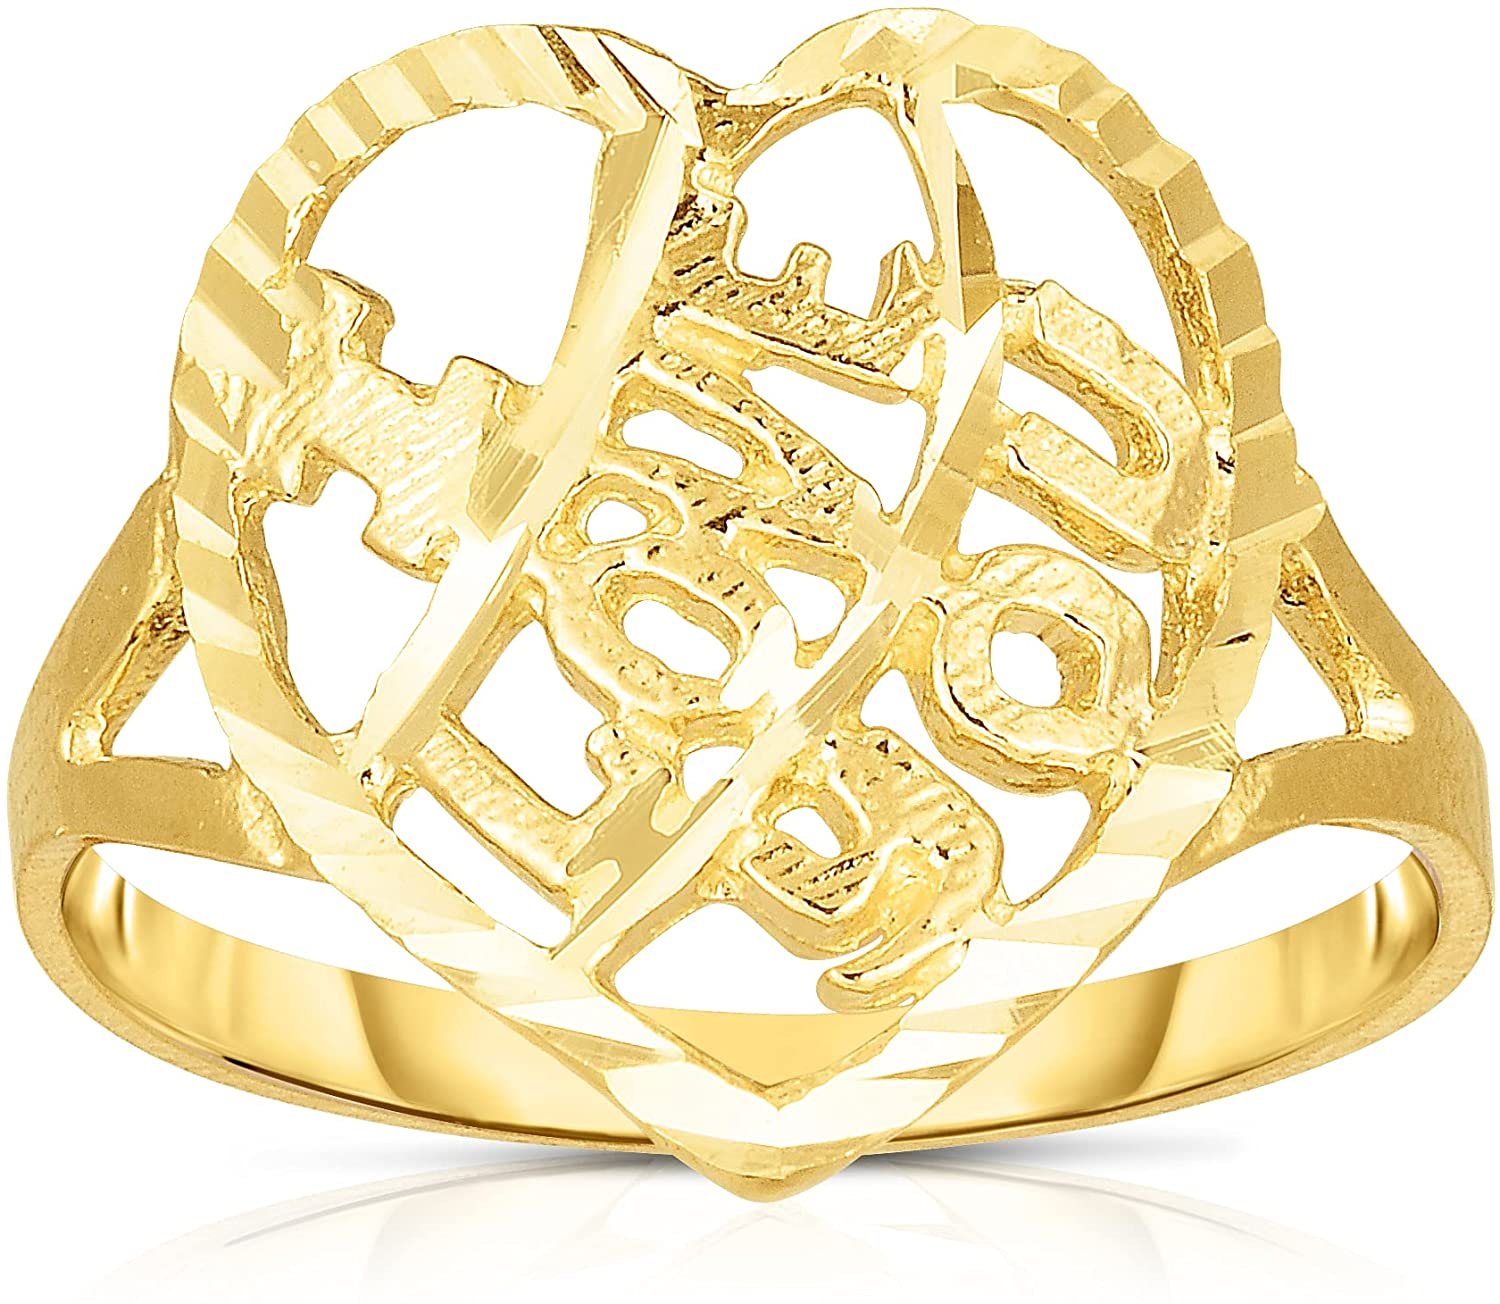 Floreo 10k Yellow Gold “I Love You” Heart Ring, Sizes 5-12